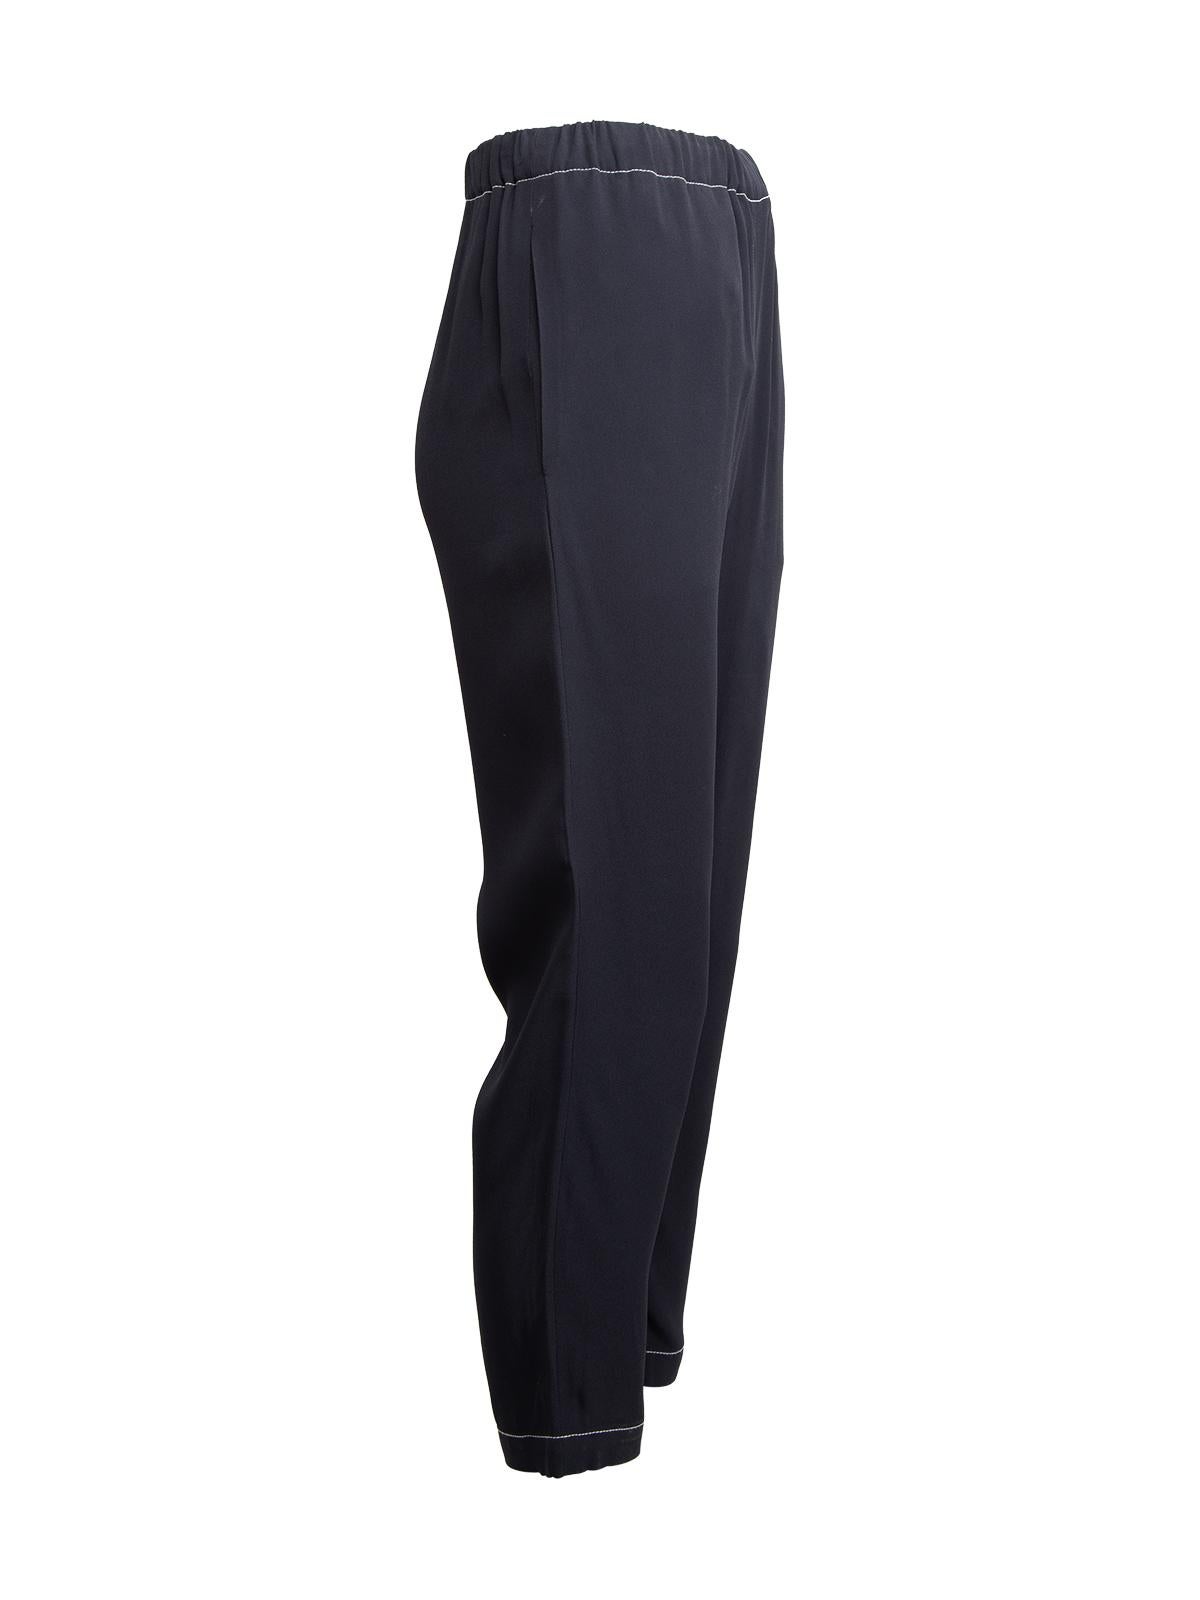 Condition is Never worn, with tag. No wear to joggers evident on this brand new Marni designer resale item. Details Navy Viscose Relaxed fit String tie waist fastening 2 x side hip pockets Made in Italy Composition 58% (viscose), 42% (acetate) Care